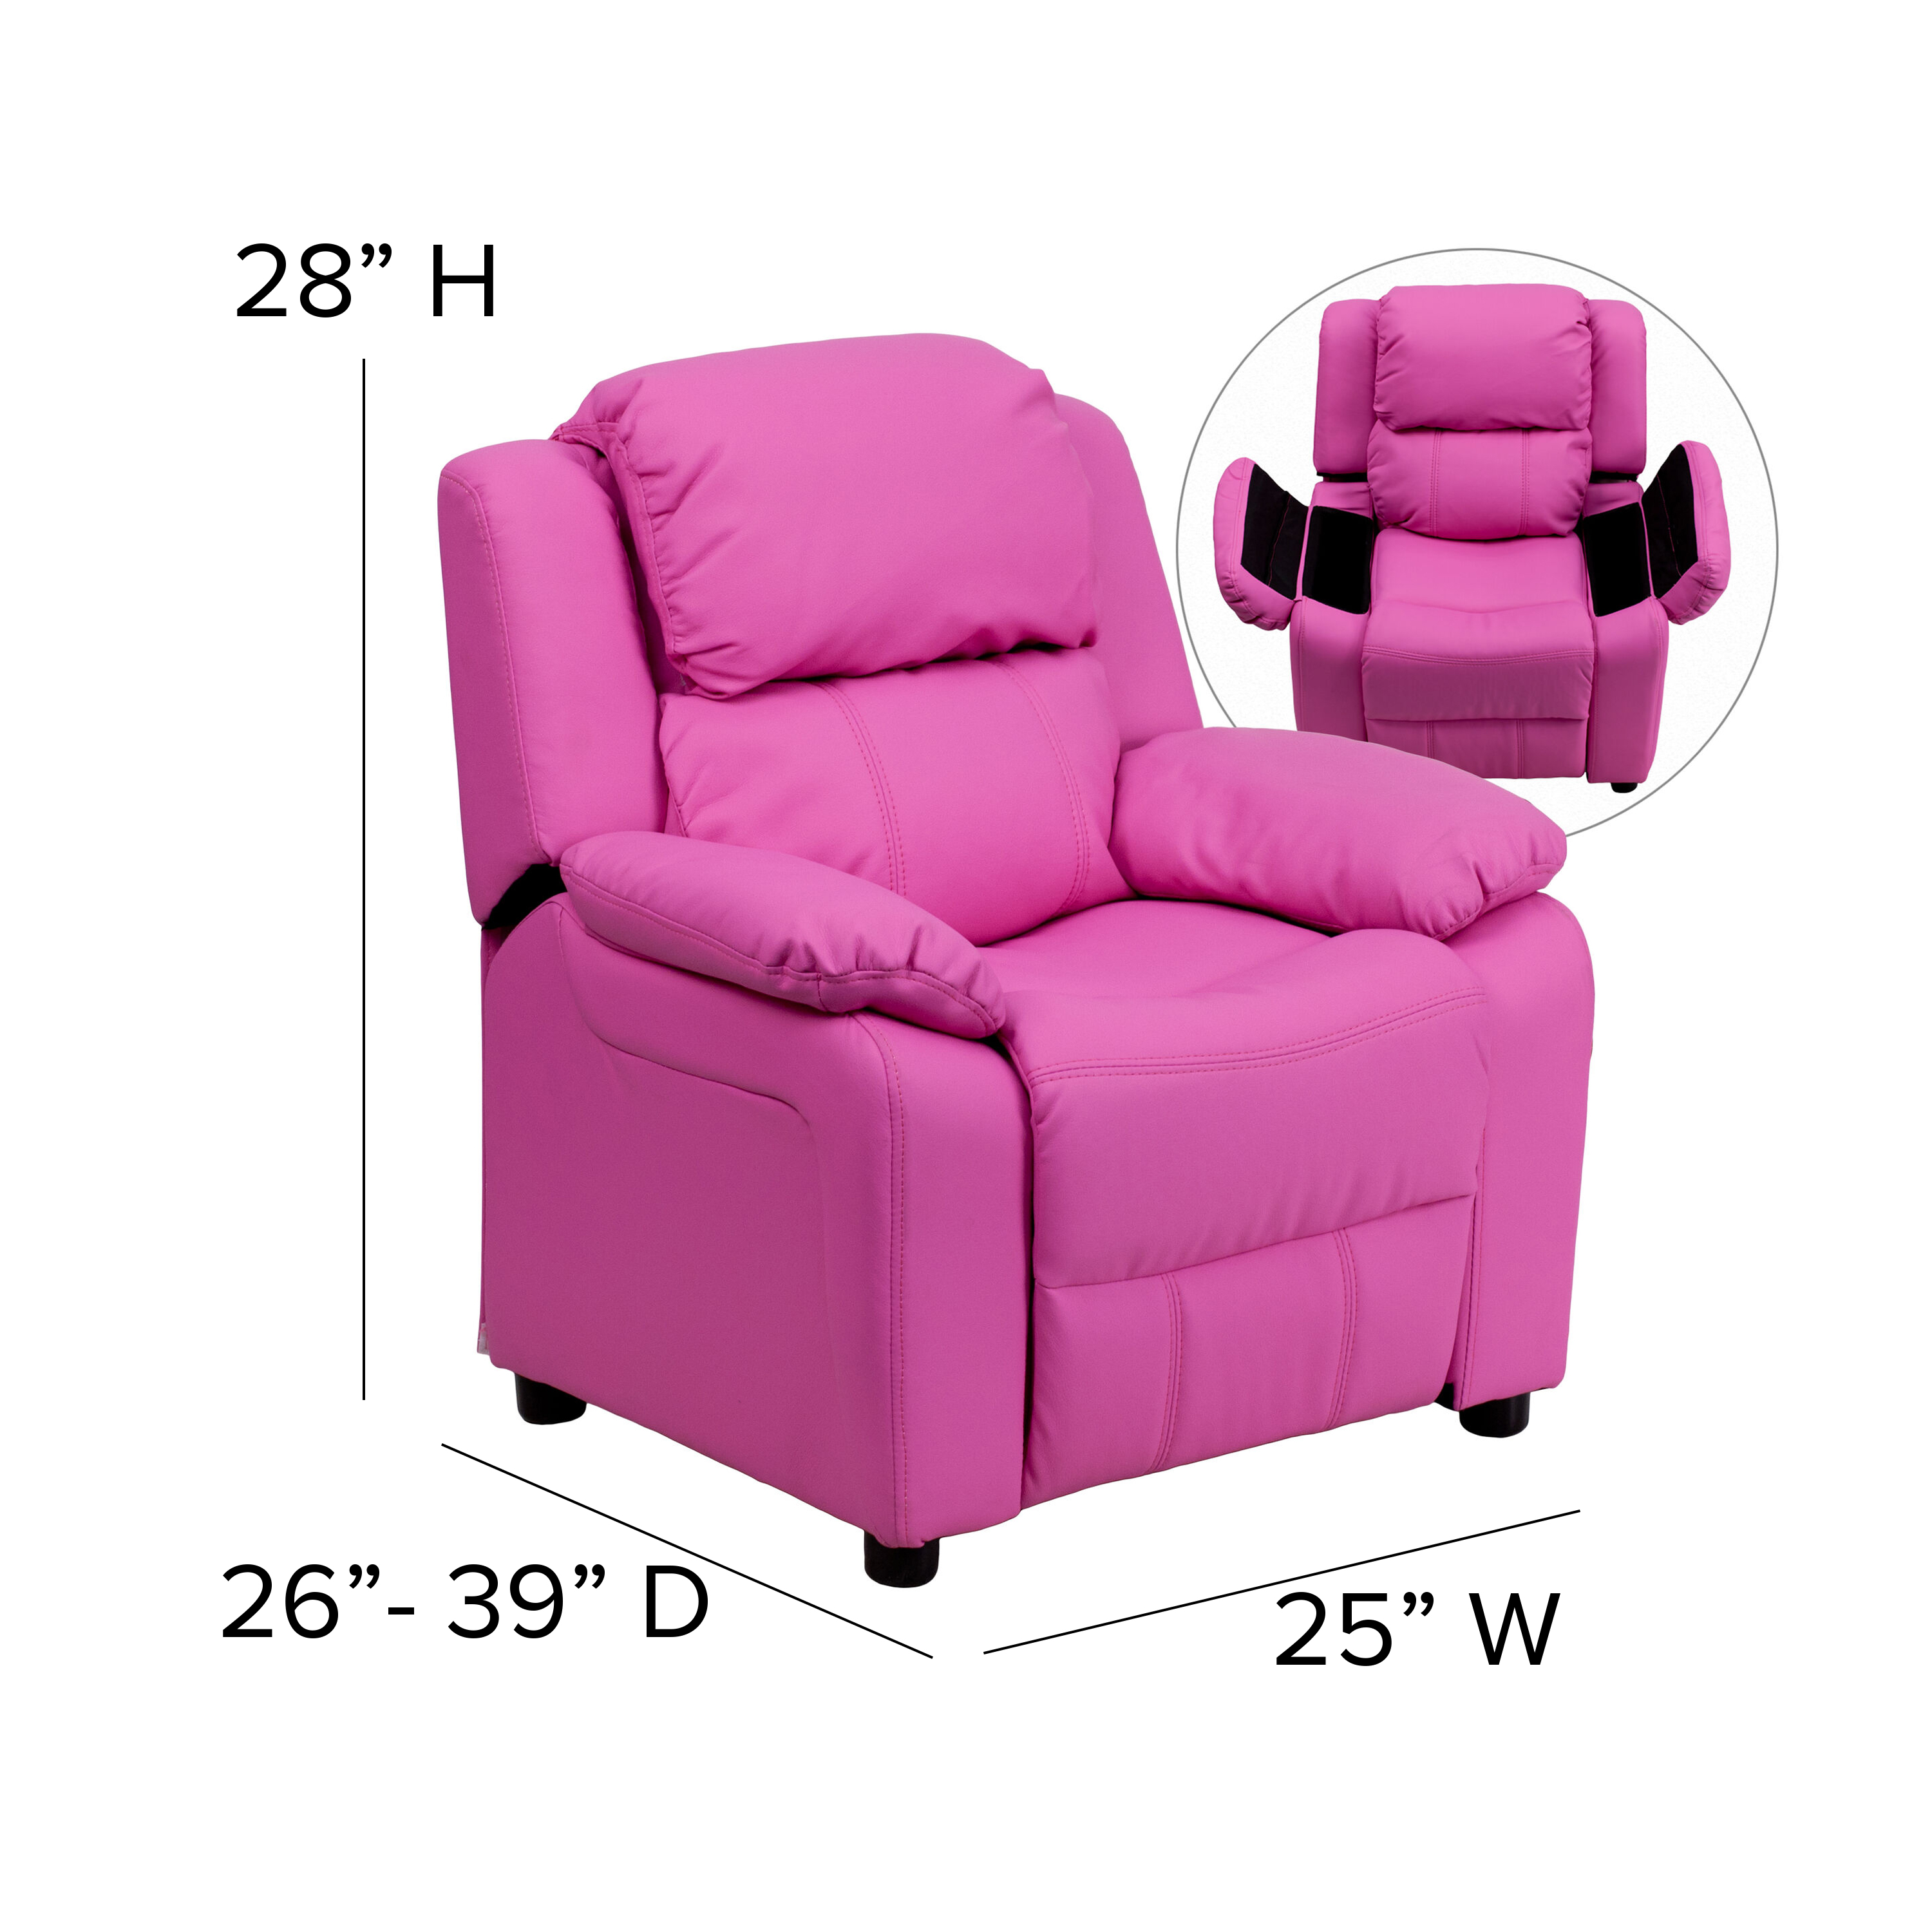 Flash Furniture Deluxe Padded Contemporary Hot Pink Vinyl Kids Recliner with Storage Arms - image 5 of 13